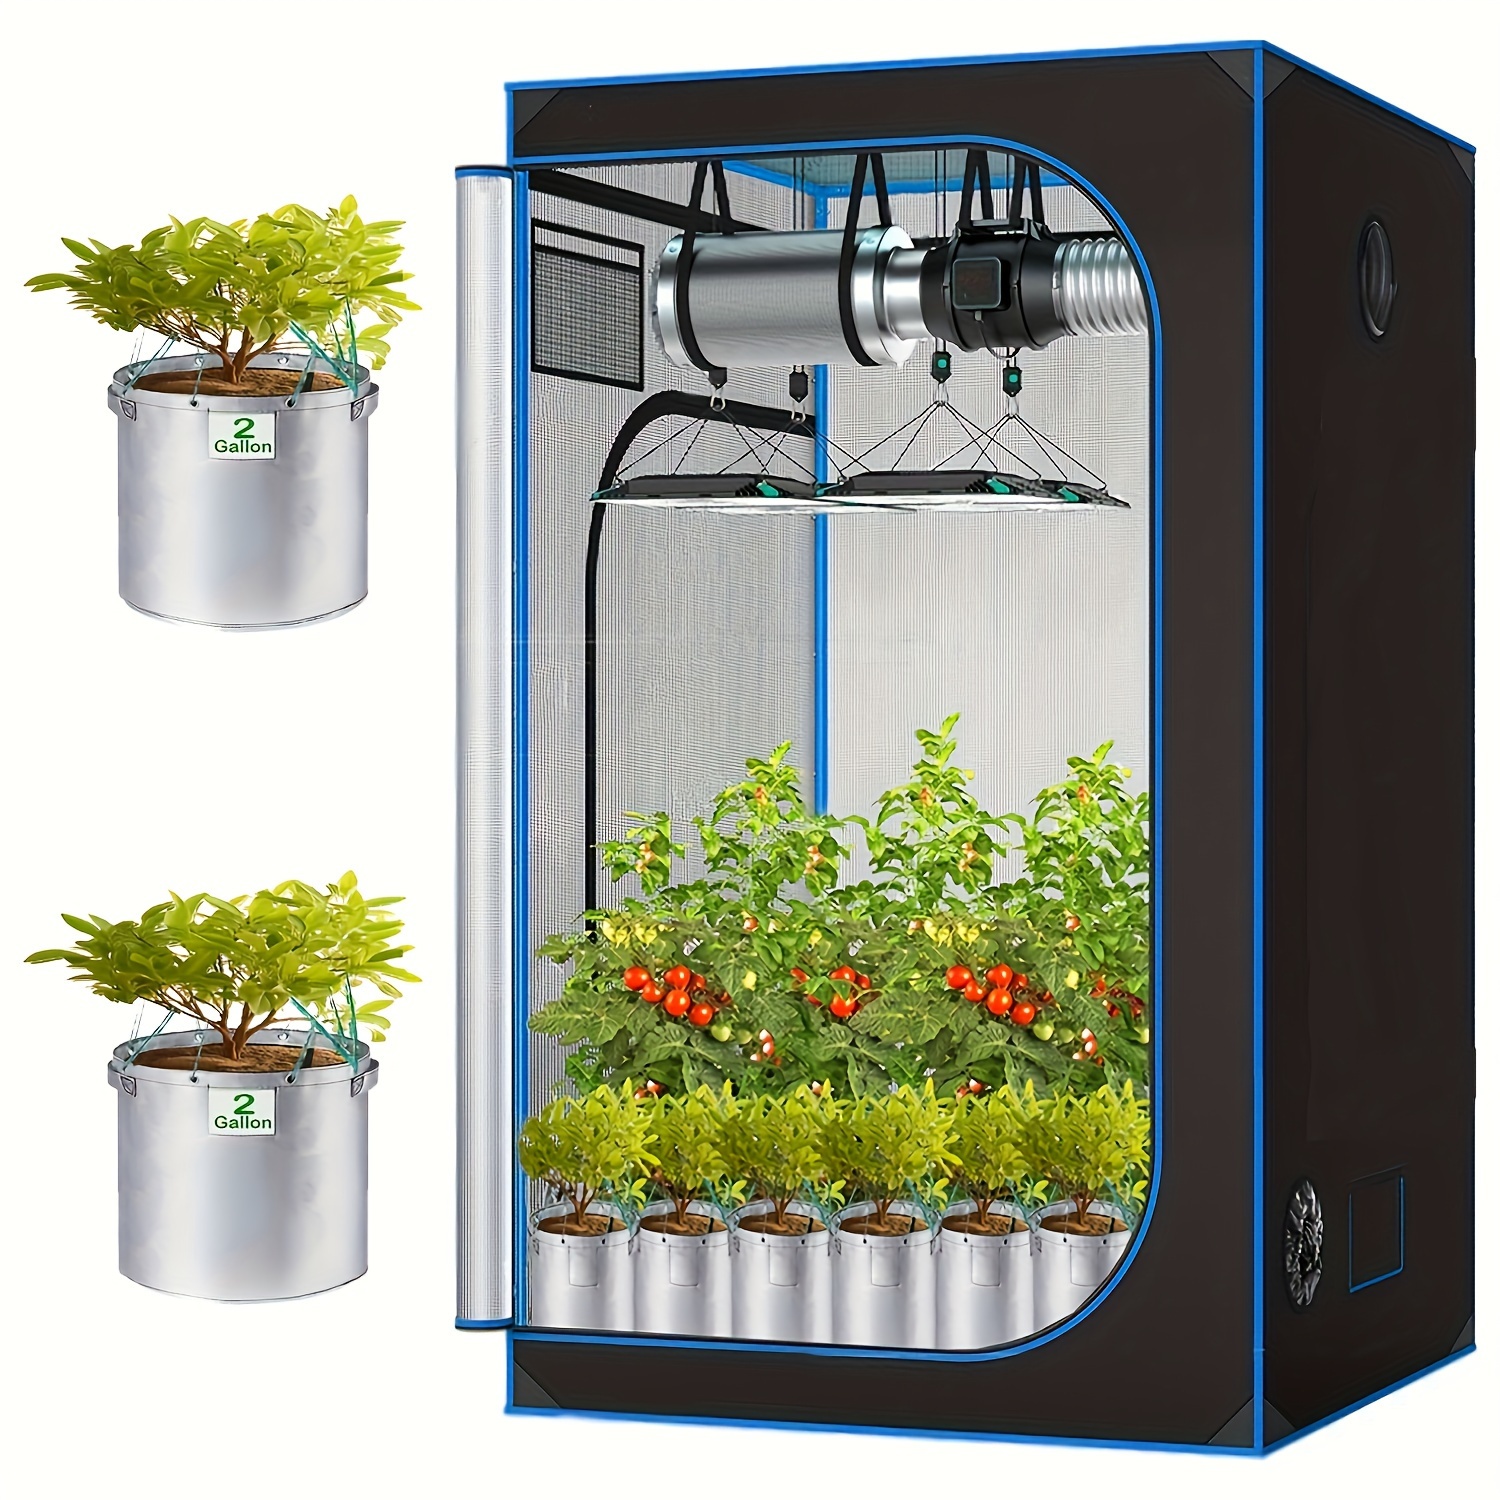 

Premium 2x2 Grow Tent Kit With 2 Gallon Bags - 24"x24"x48" High Reflective Polyester, Detachable Floor Tray & Sturdy Steel Frame For Hydroponic Indoor Plants, Vegetables & Flowers